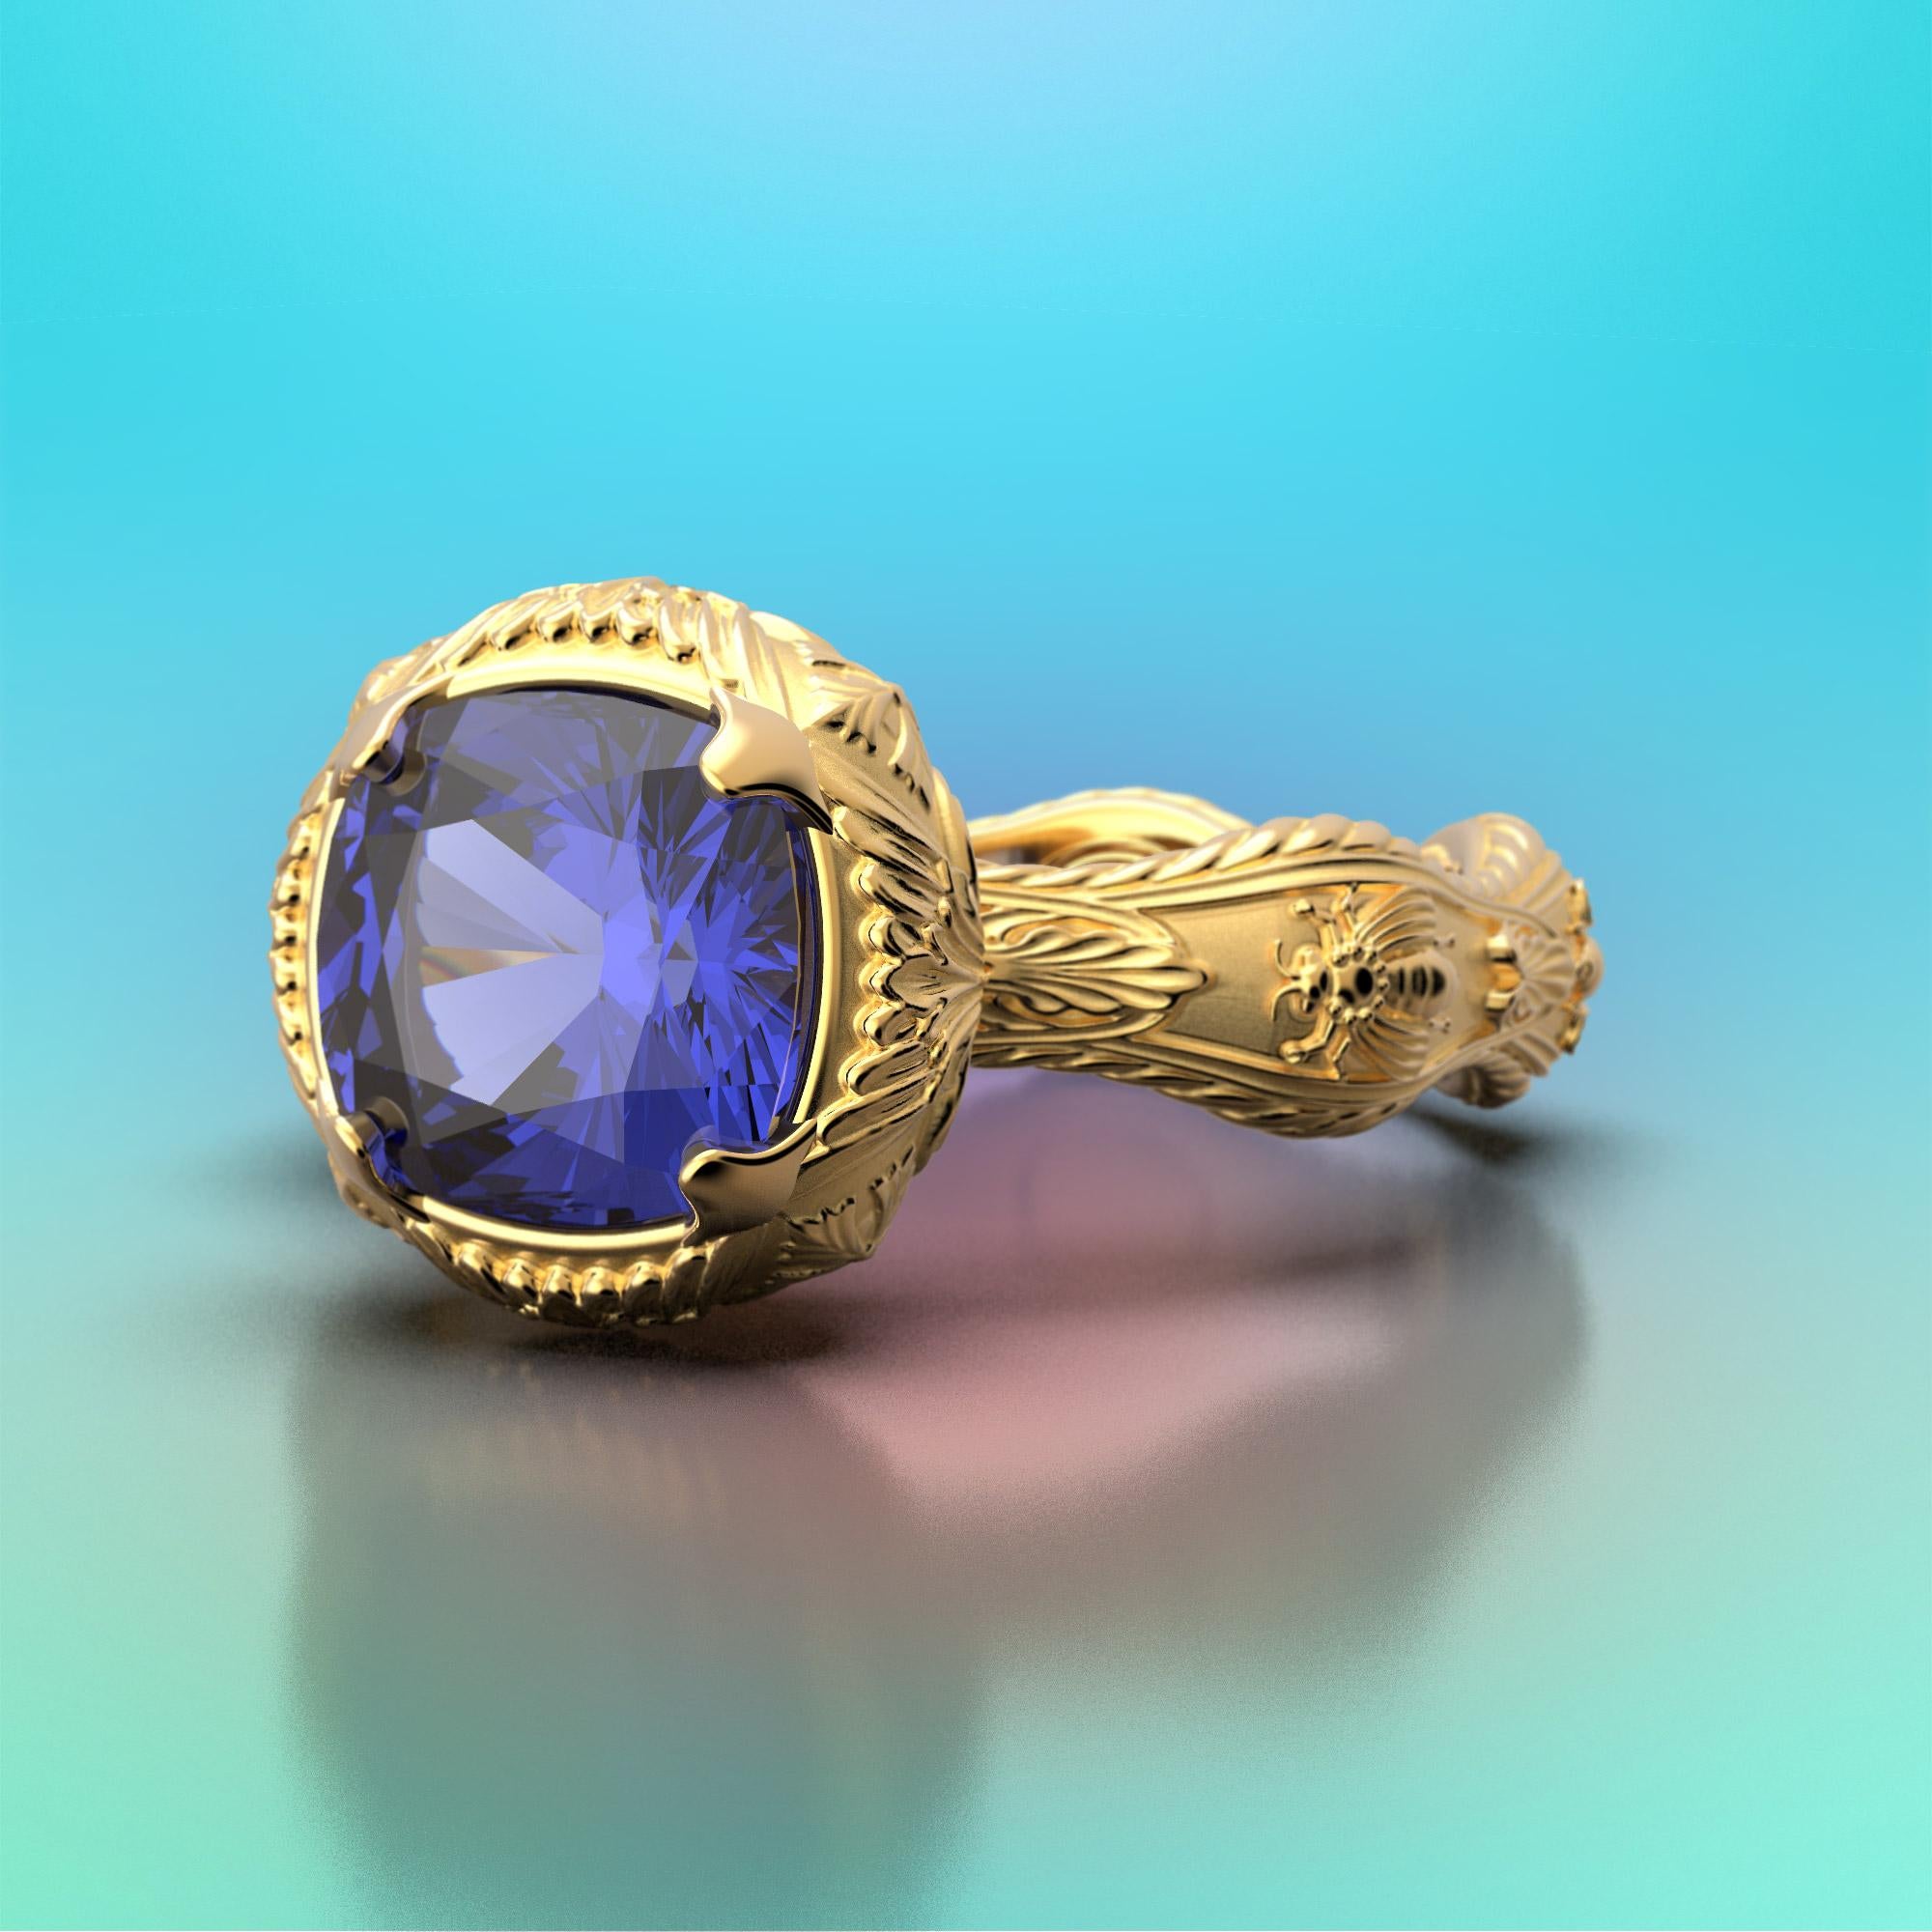 For Sale:  Tanzanite Ring Made In Italy by Oltremare Gioielli in 18k genuine gold 10